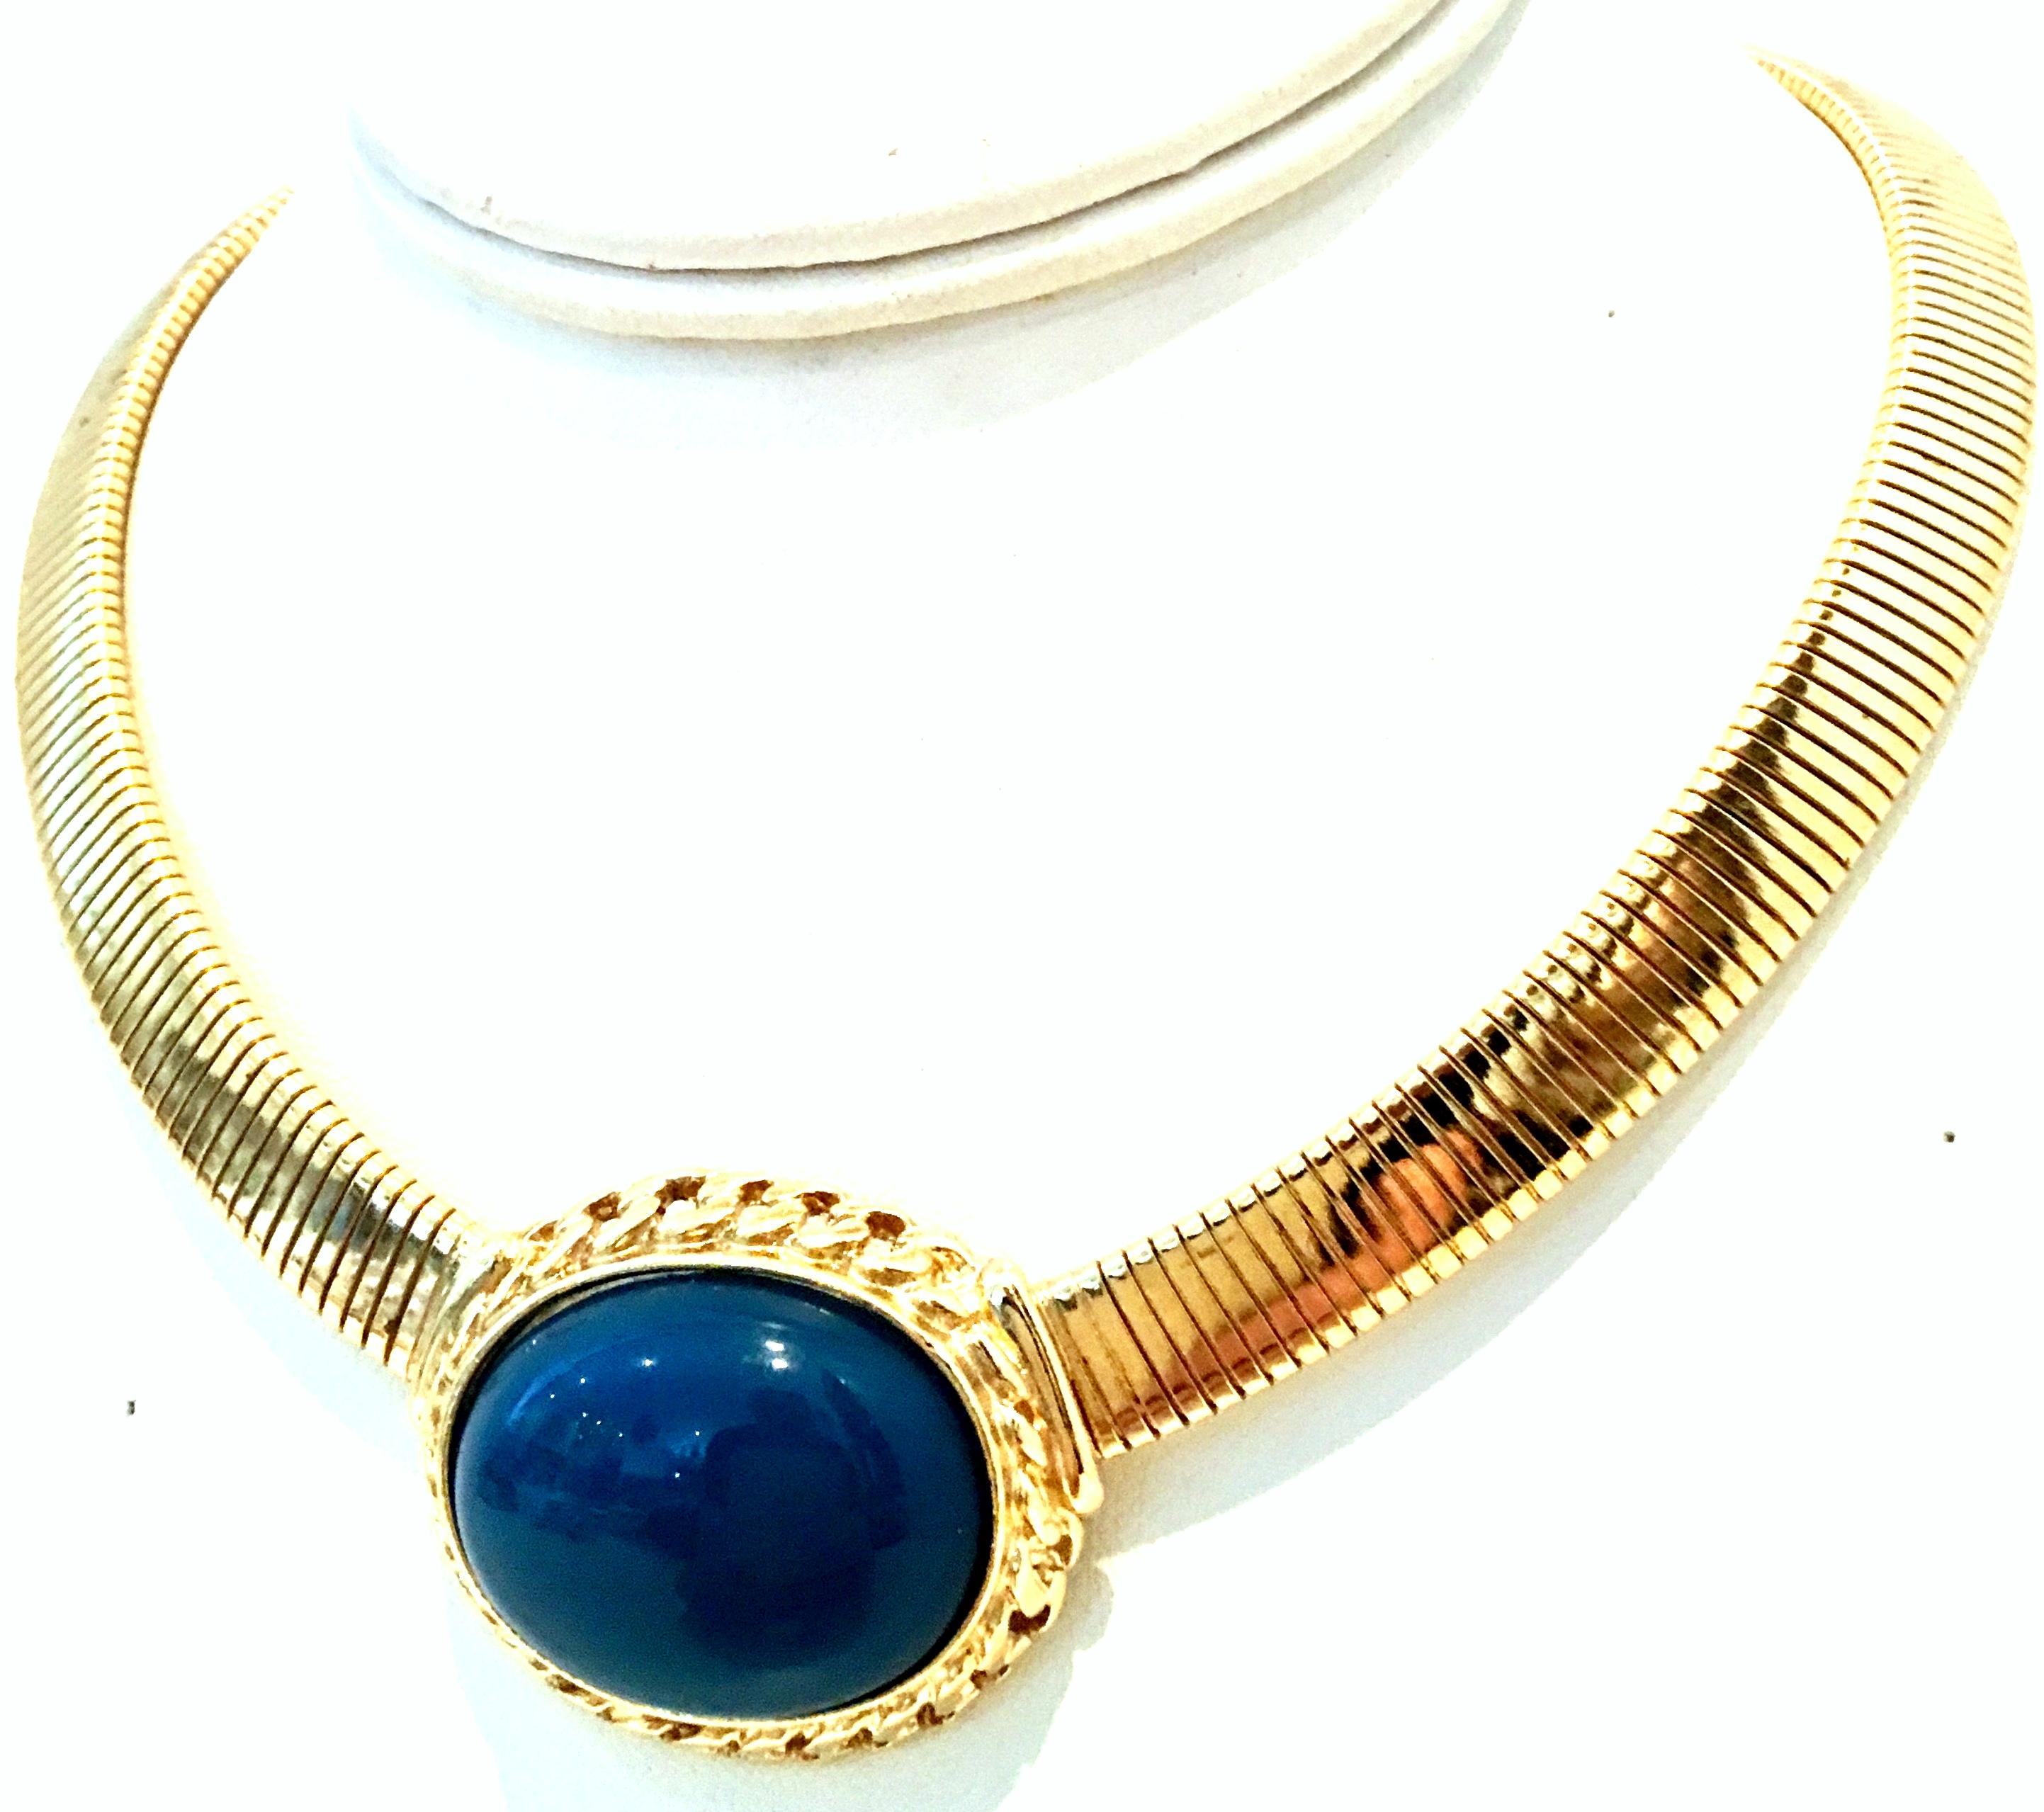 20th Century Gold Plate & Faux Blue Lapis Lazuli Omega Choker Necklace By, Trifari. This gold plate omega style choker necklace features a large oval cabochon set faux blue Lapis Lazuli stone of approximately, 1.13